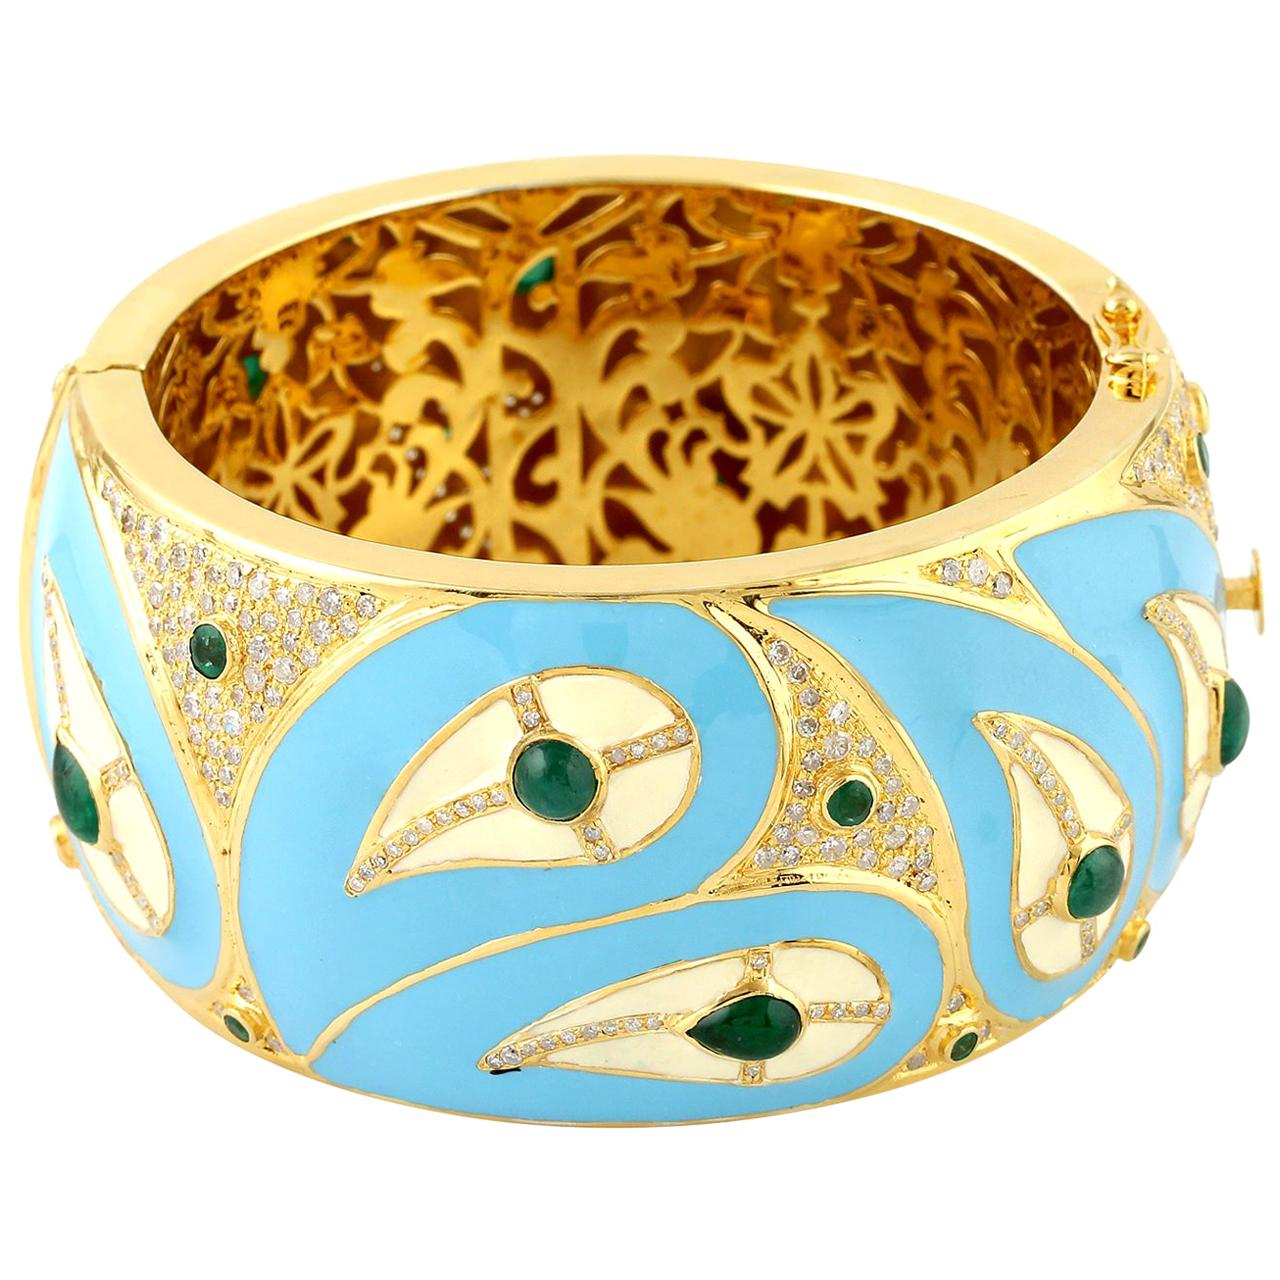 Turquoise Enamel Bangle with Diamonds and Emerald in 18 Karat Gold and Silver